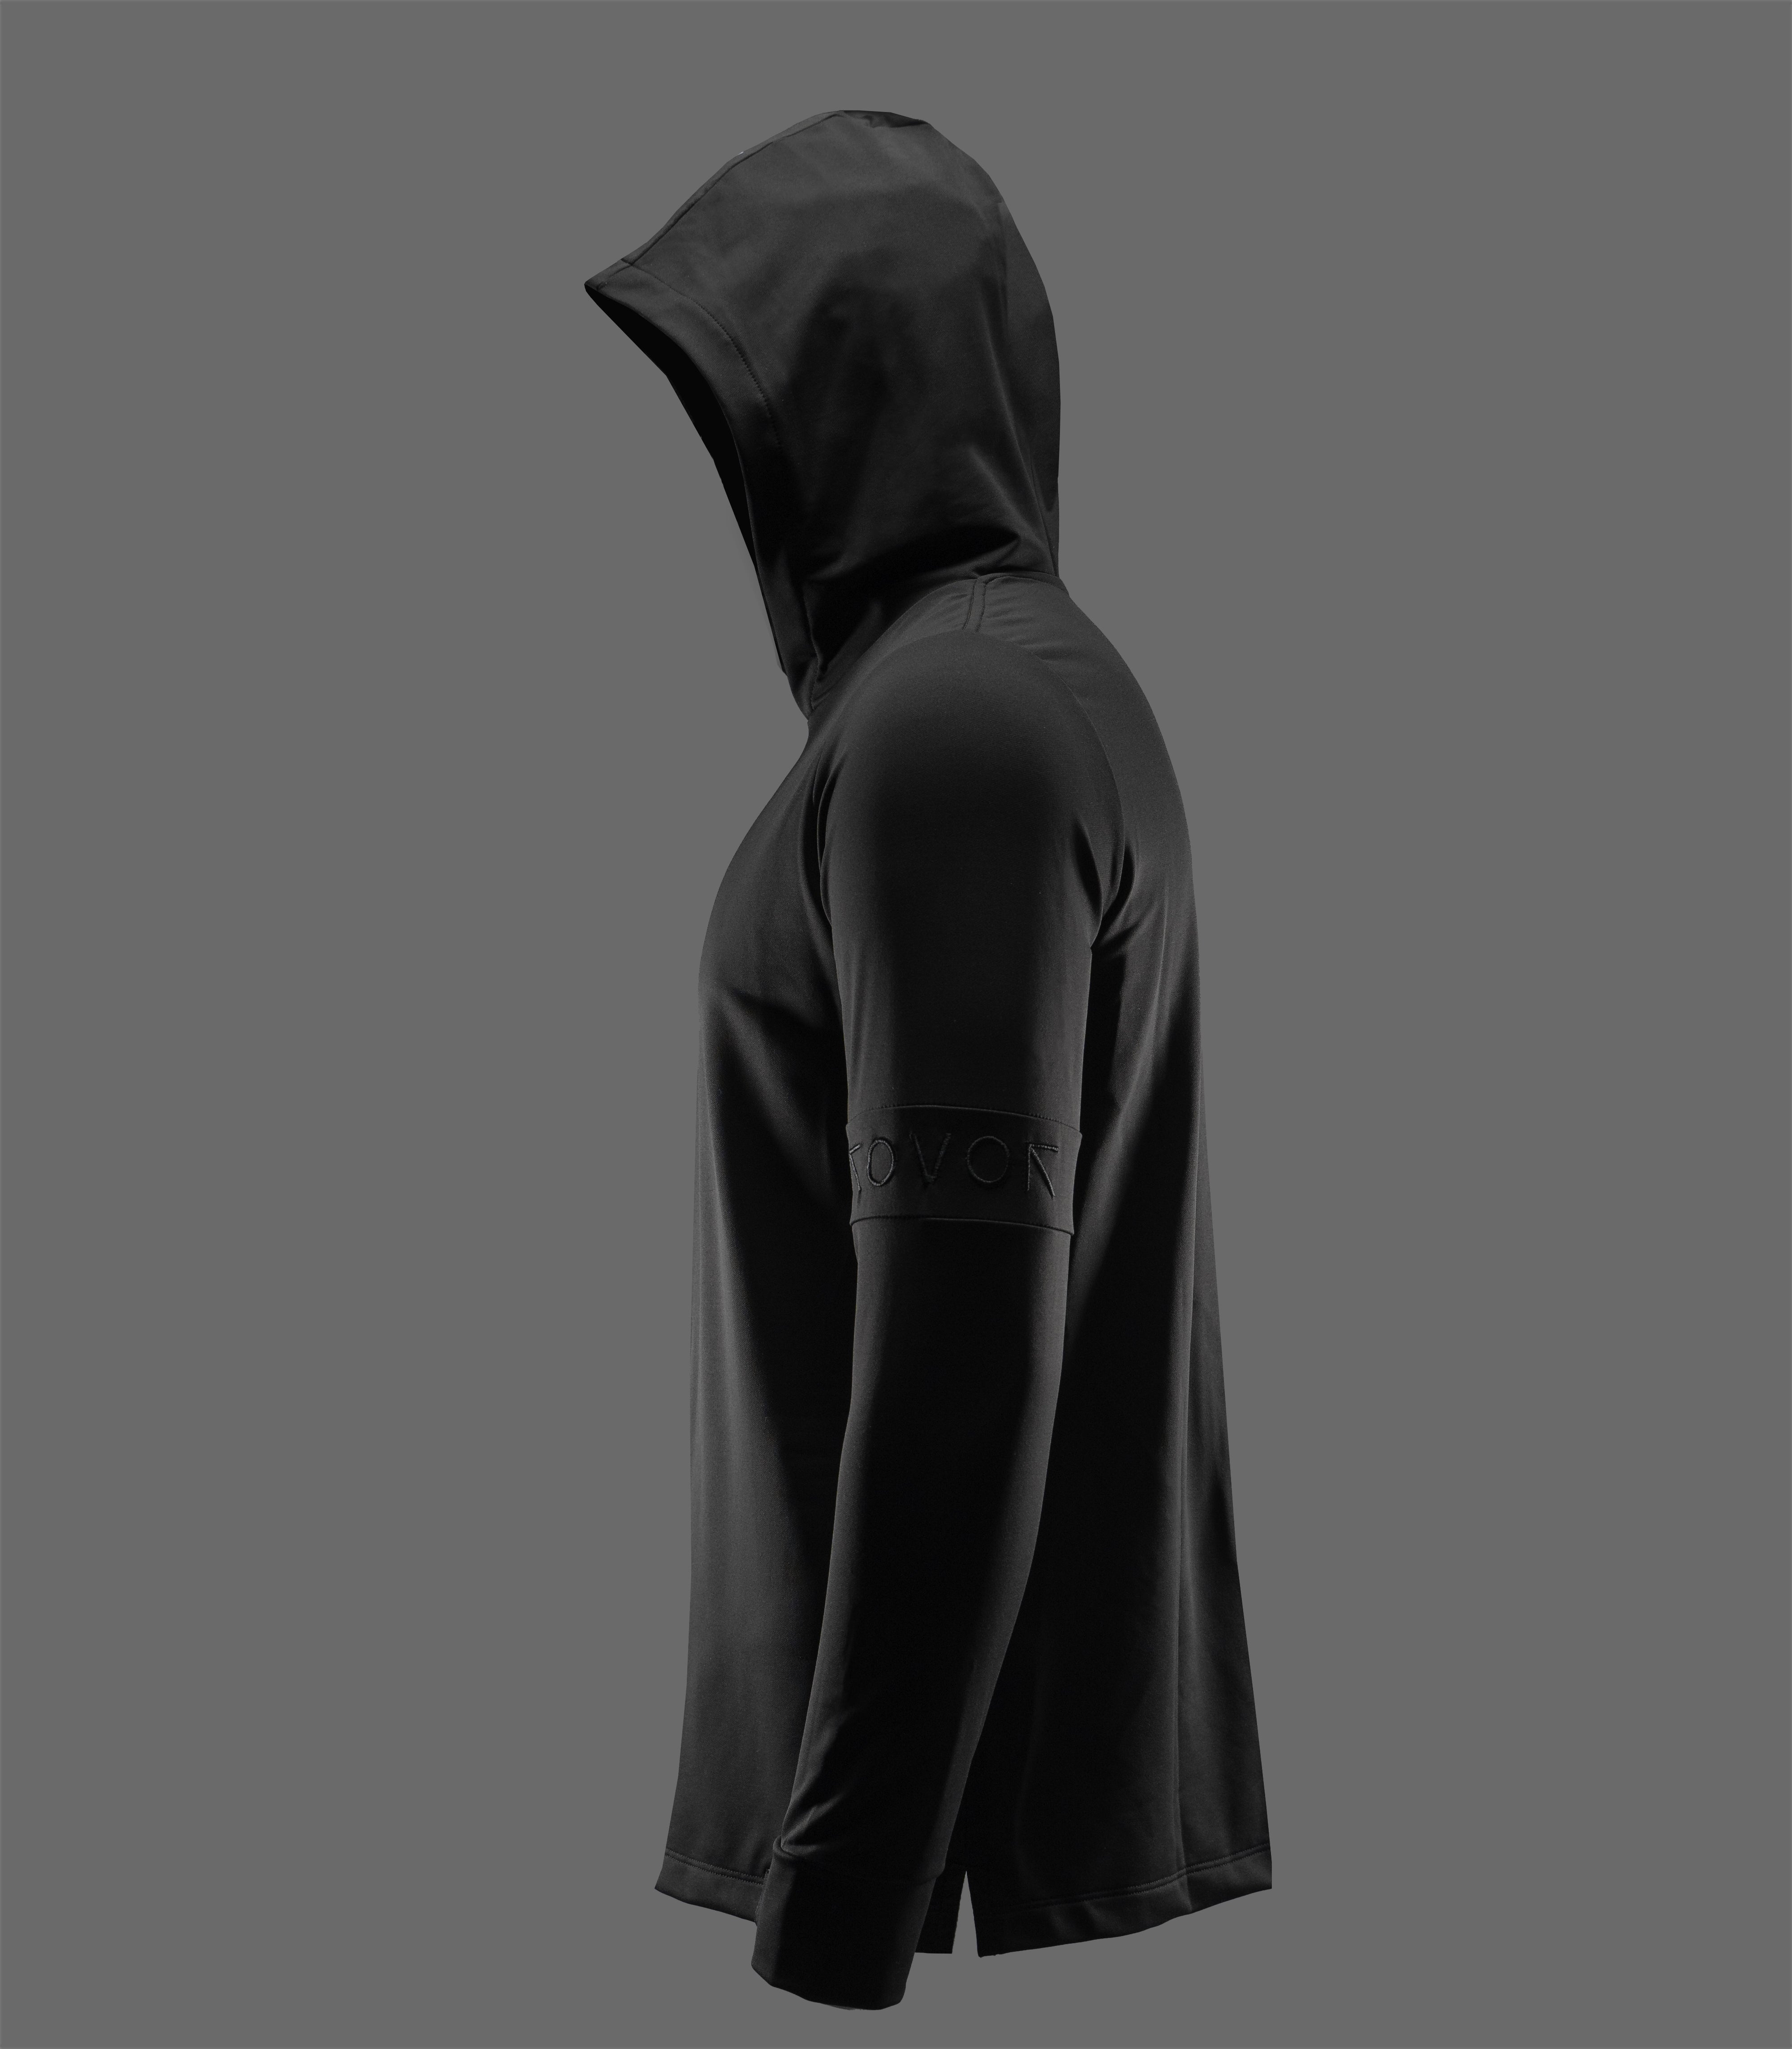 L 新品 FCRB 19AW UNDER LAYER HOODIE BLACK-